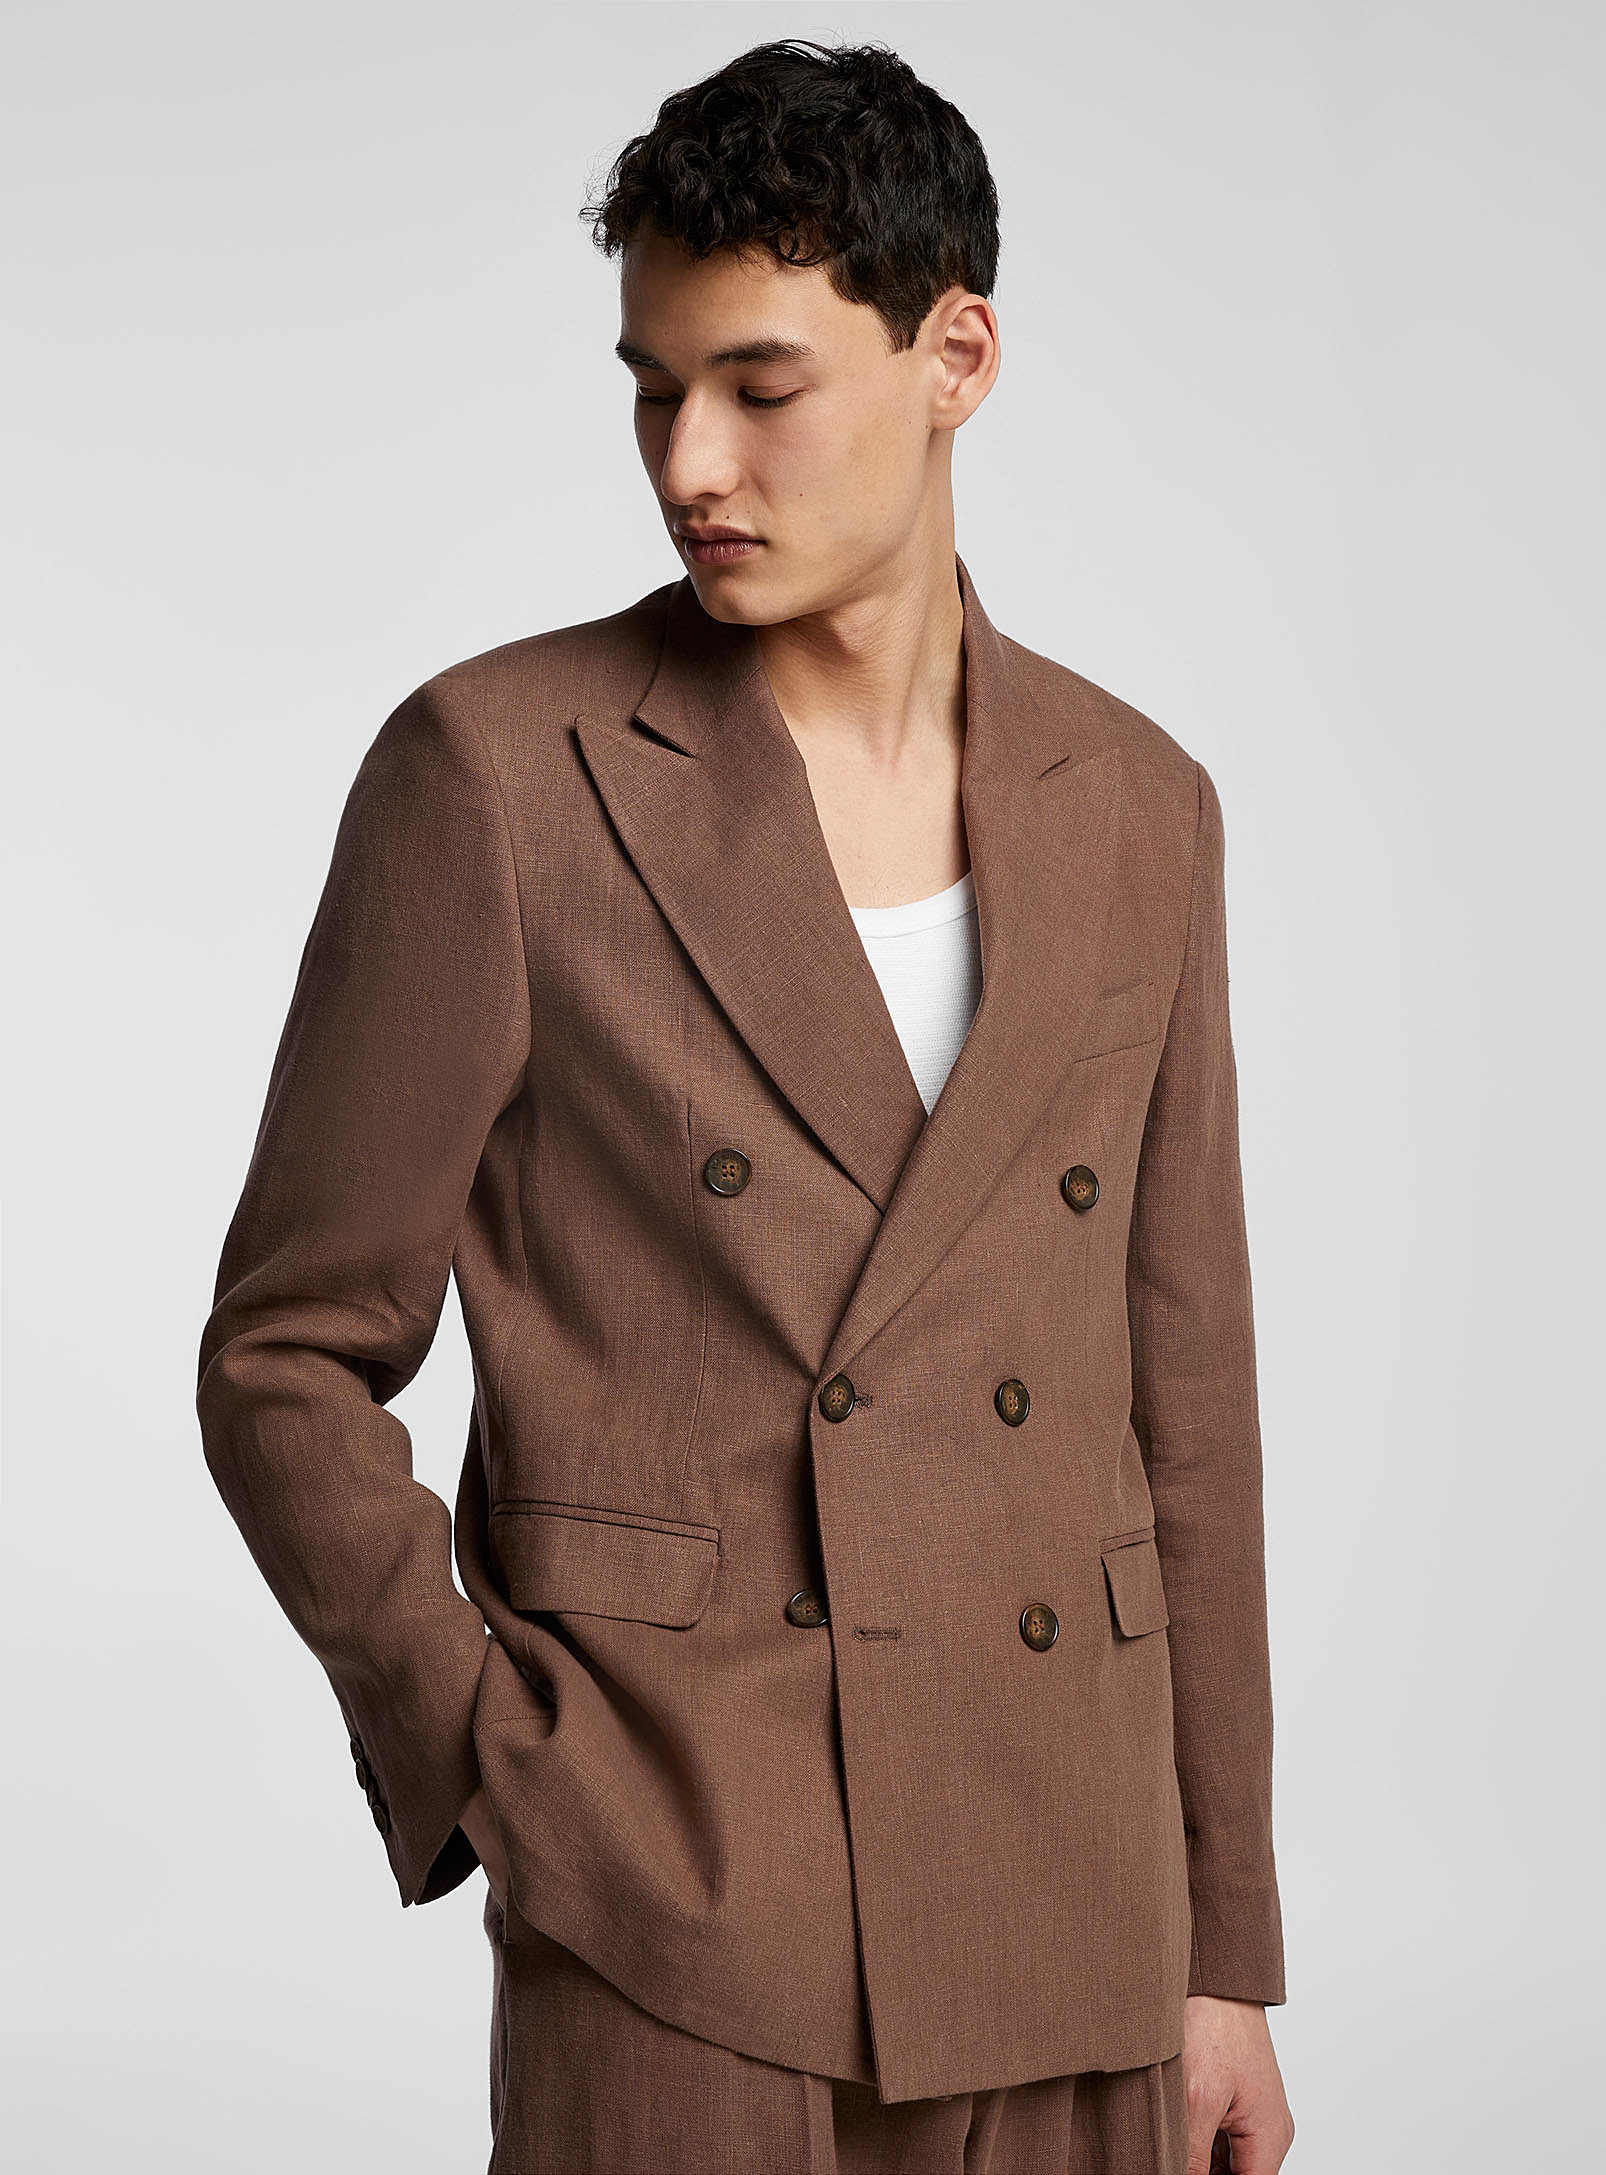 I'M BRIAN - Men's Brown pure linen double-breasted jacket